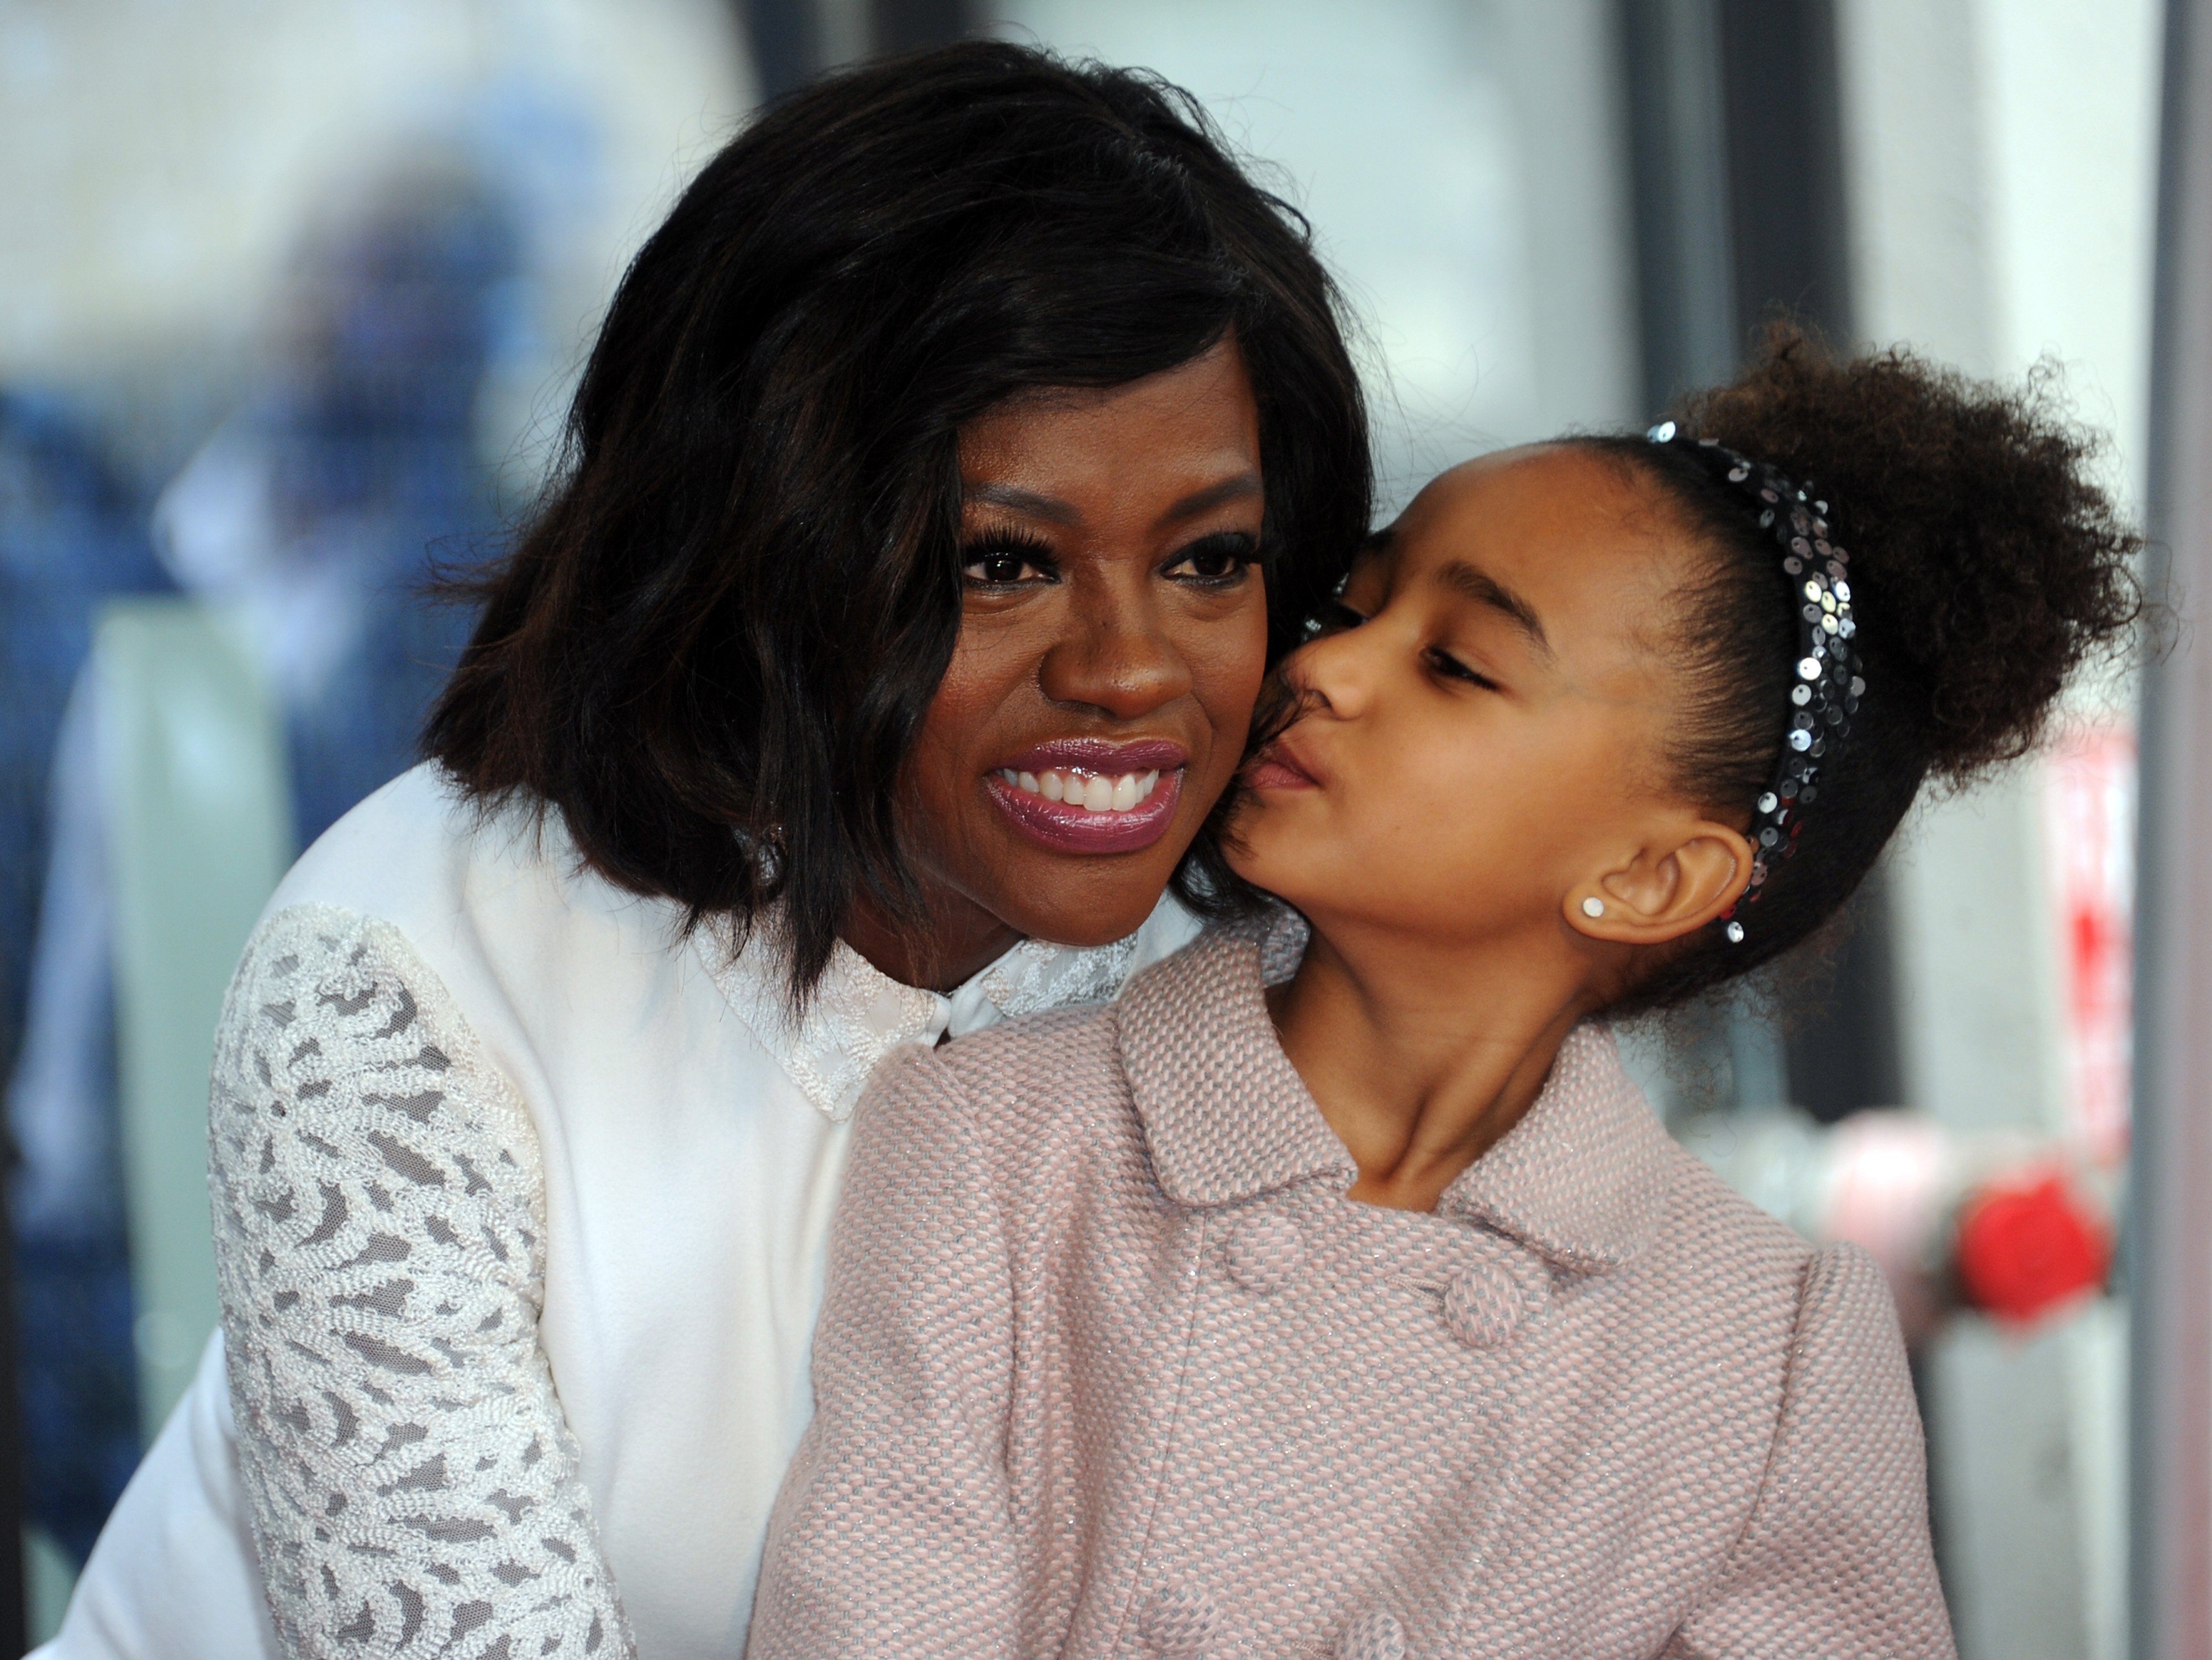 Actress Viola Davis and her daughter Genesis Tennon at her Star ceremony on the Hollywood Walk of Fame on January 5, 2017| Photo: Getty Images